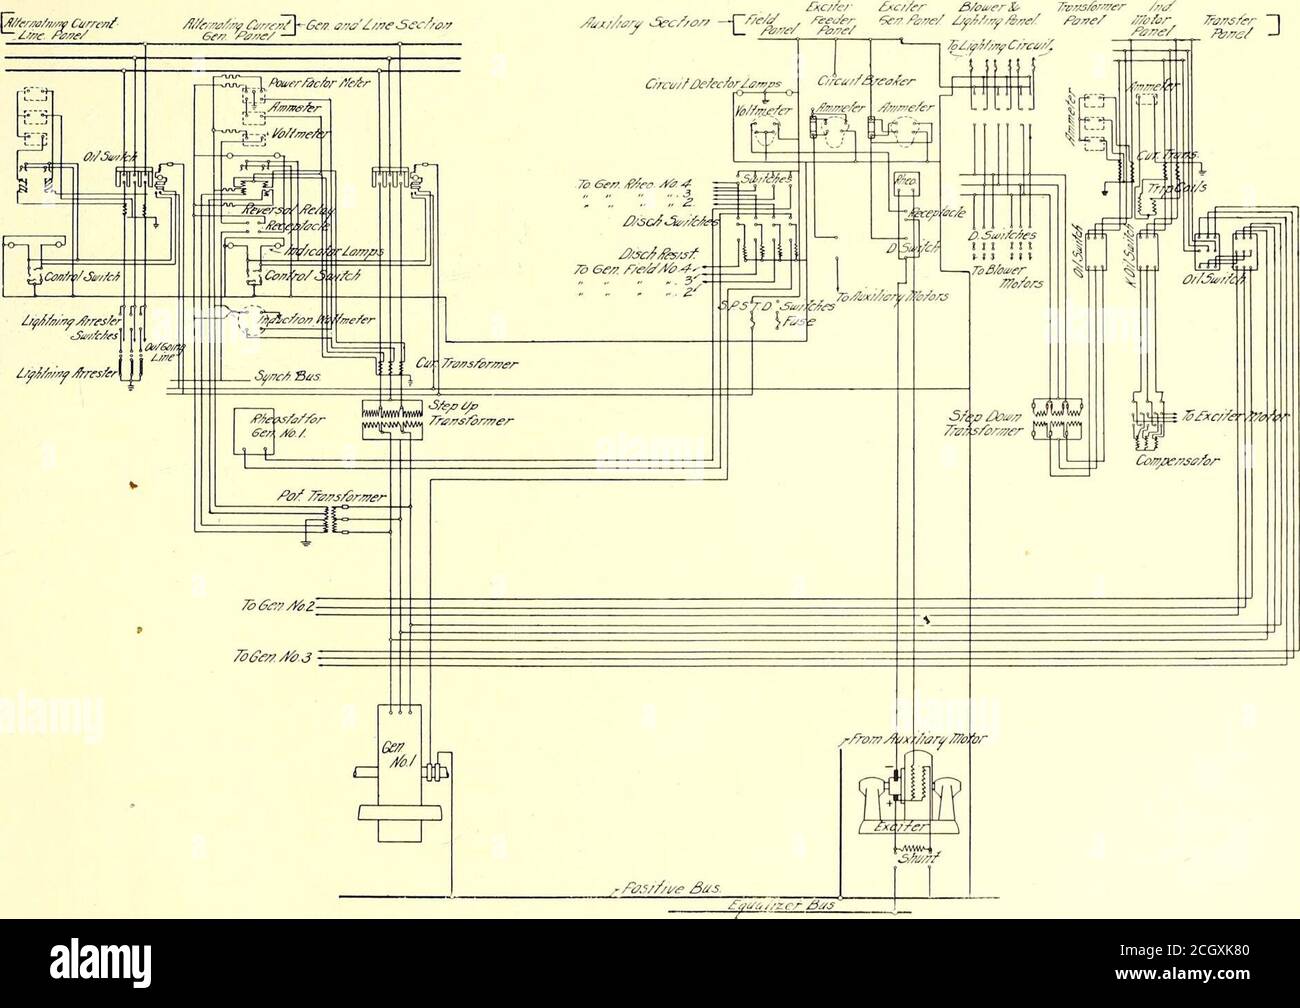 The Street railway journal . 0M&lt;rr/?a/#ry WIRING DIAGRAM OF SUB-STATION. WIRING  DIAGRAM OF MAIN STATION 5/6 STREET RAILWAY JOURNAL. [Vol. XX. No. 14.  panel, because its instruments and controlling switches allrelate